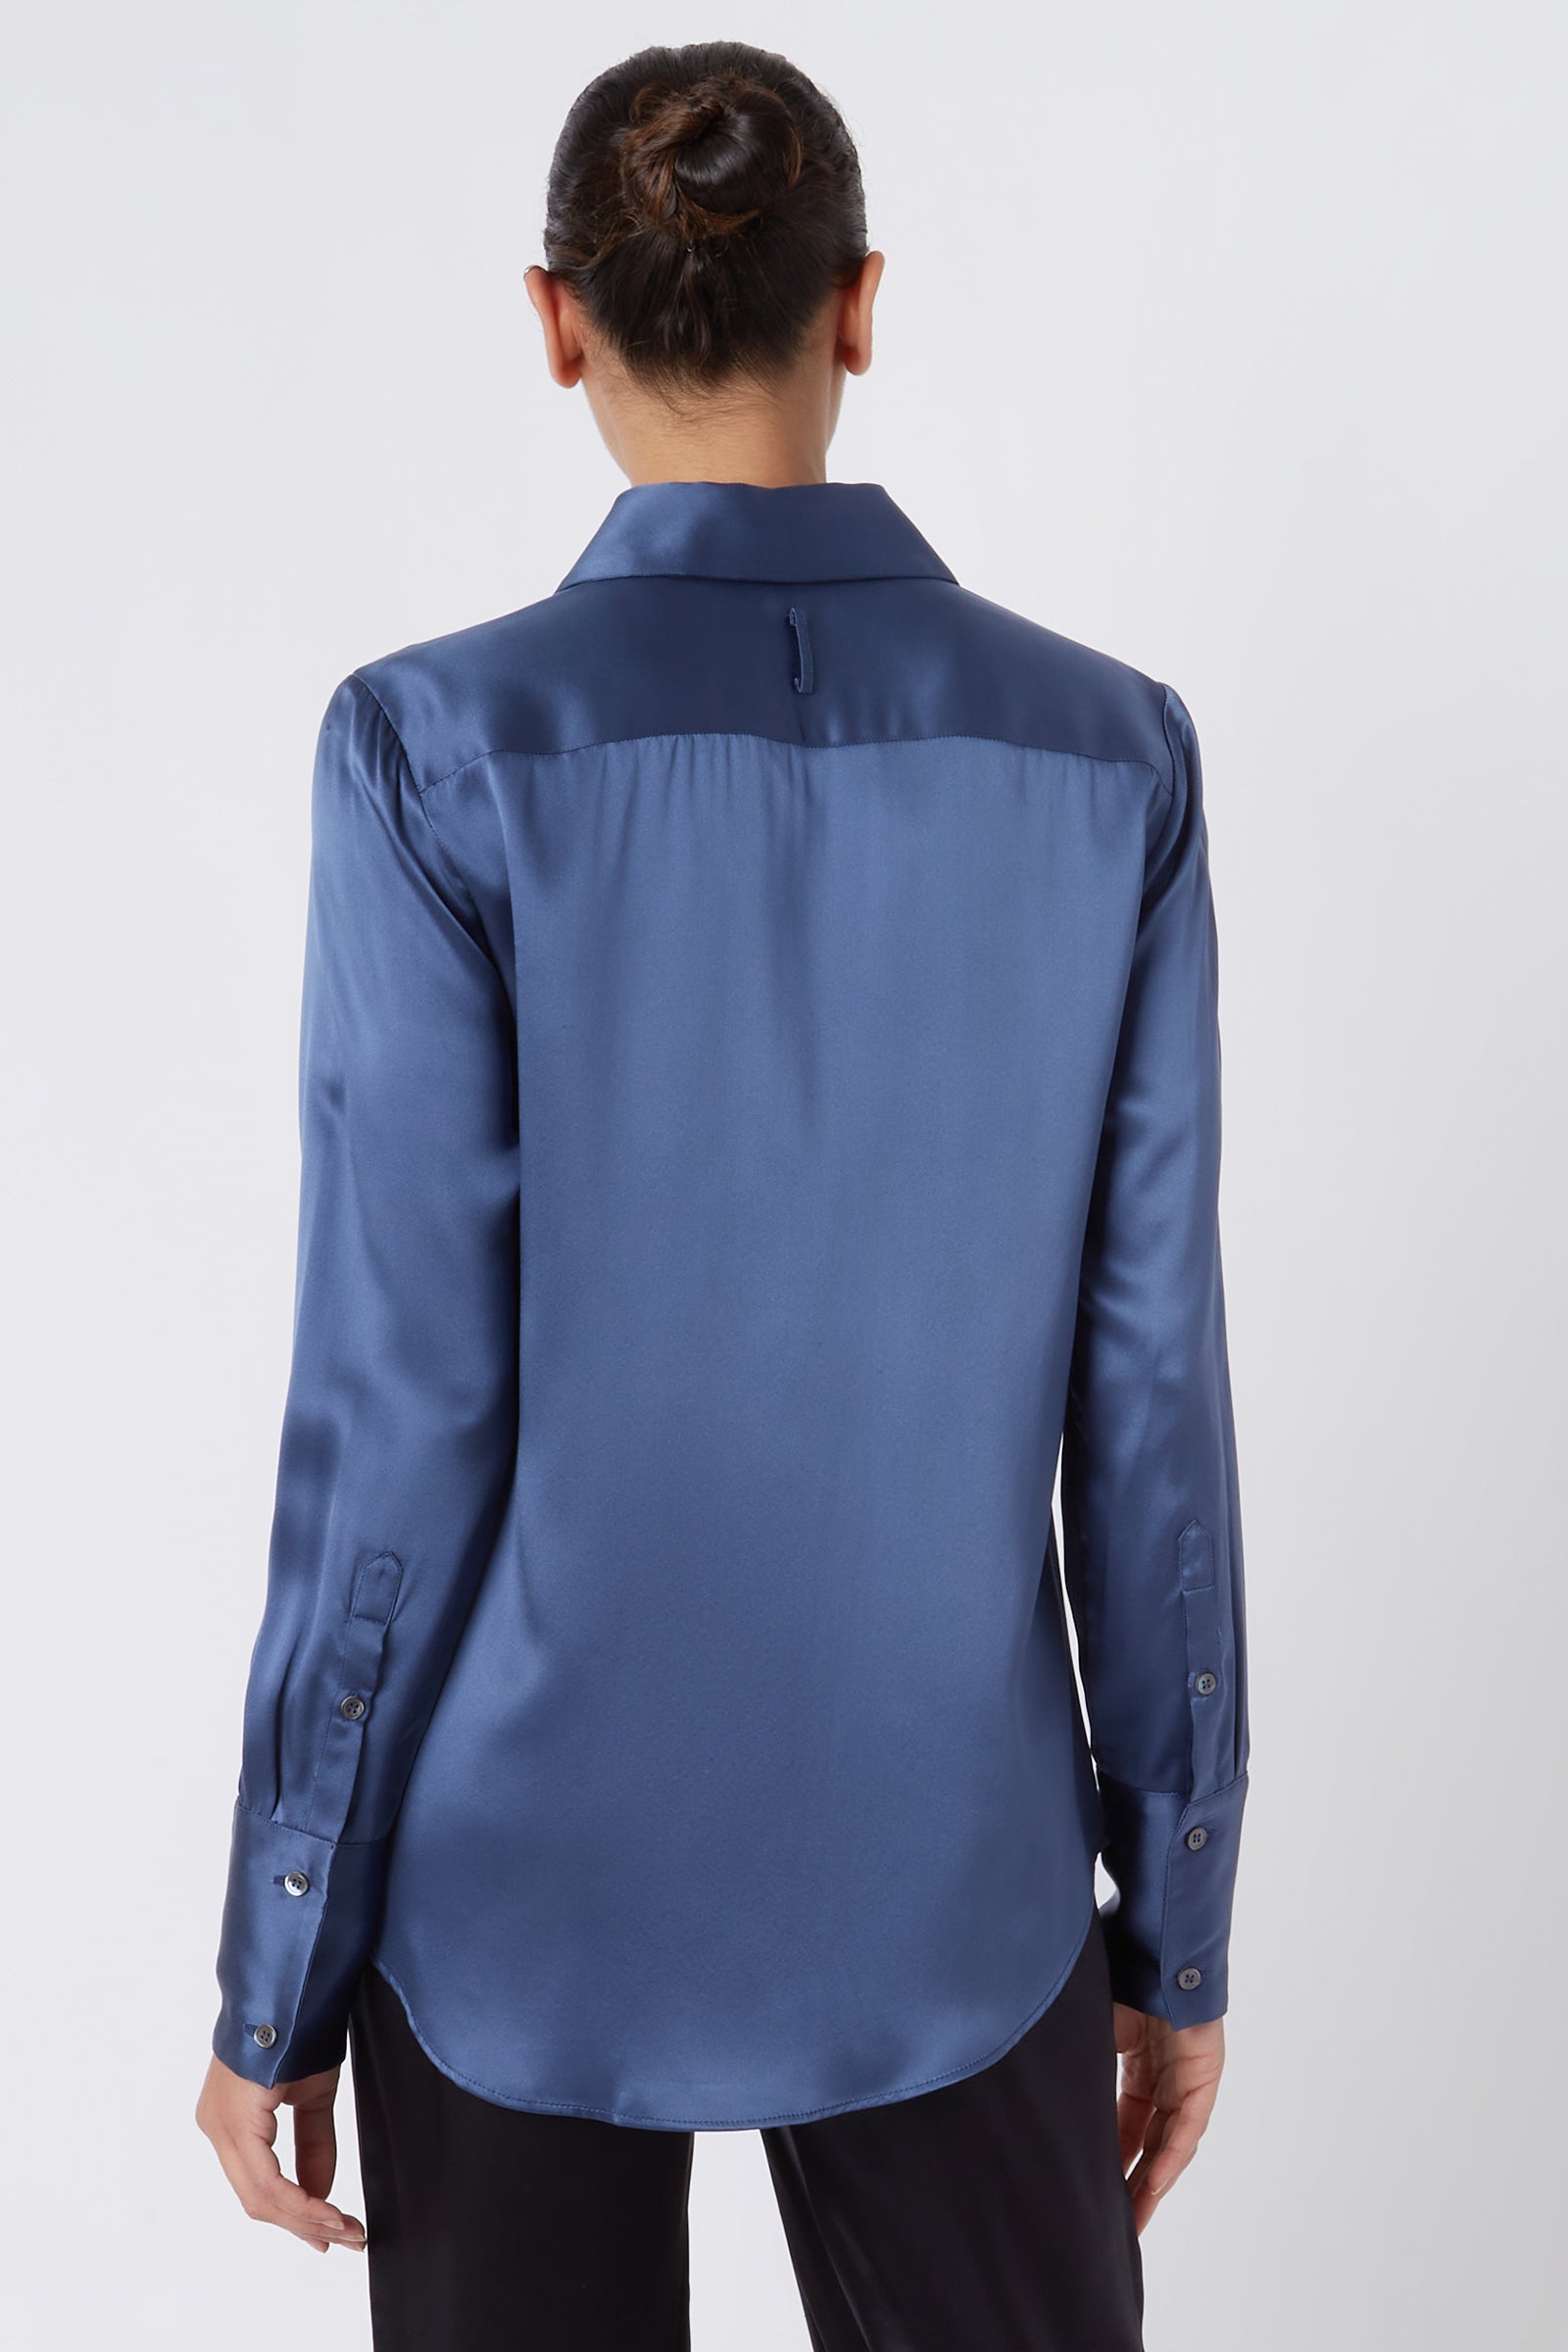 Kal Rieman Classic Tailored Blouse in Dusty Blue Silk on Model Cropped Back View